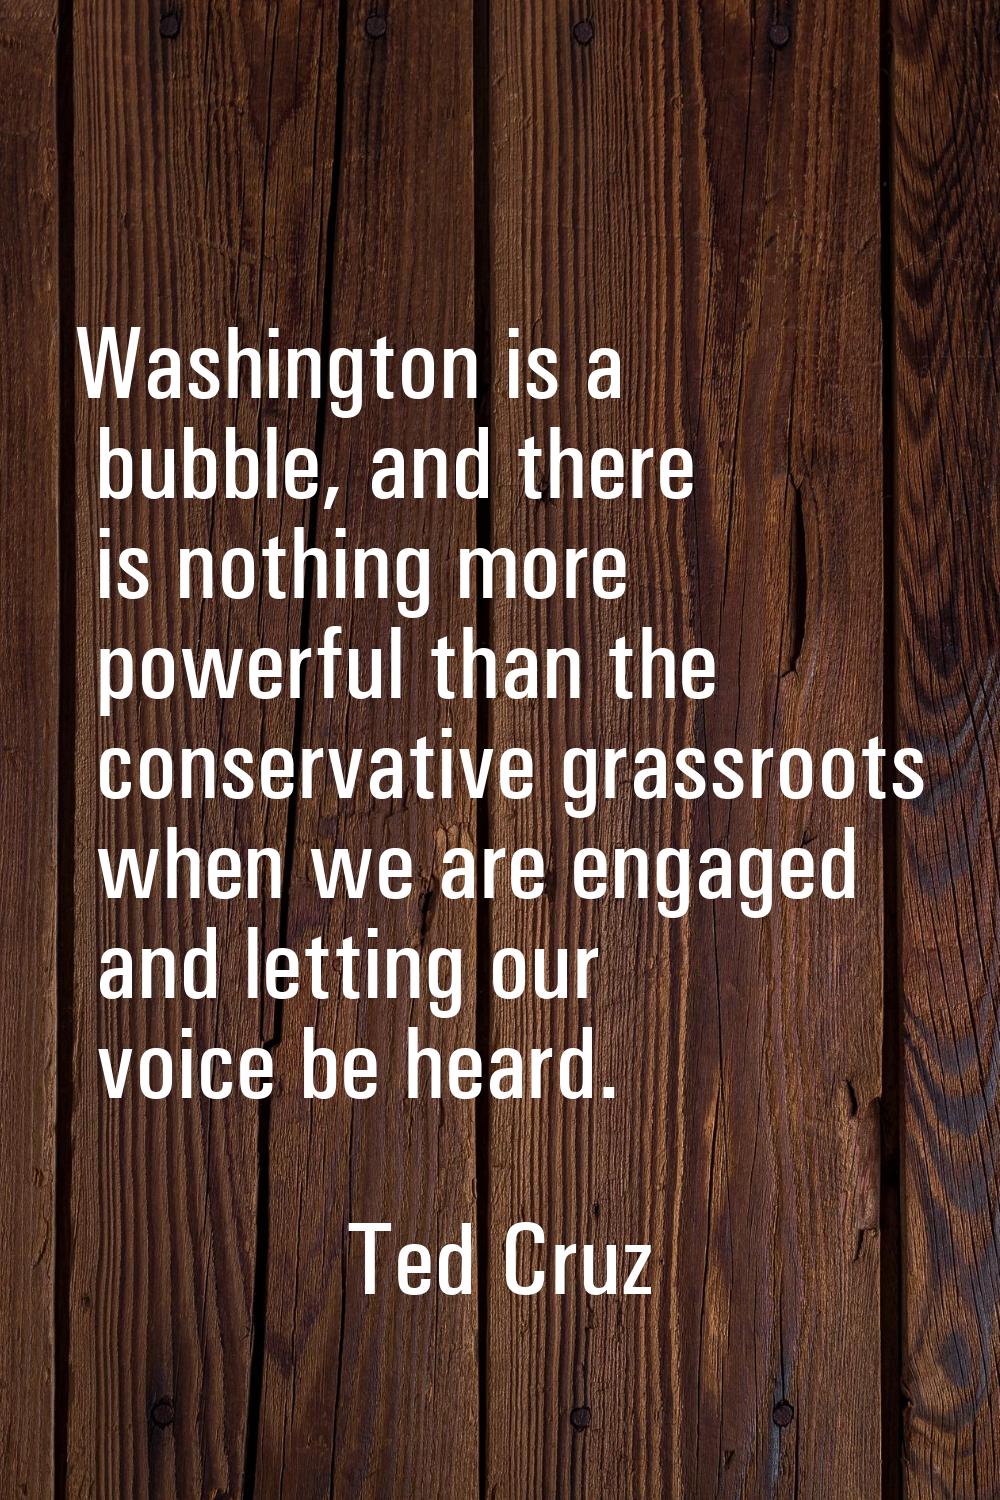 Washington is a bubble, and there is nothing more powerful than the conservative grassroots when we